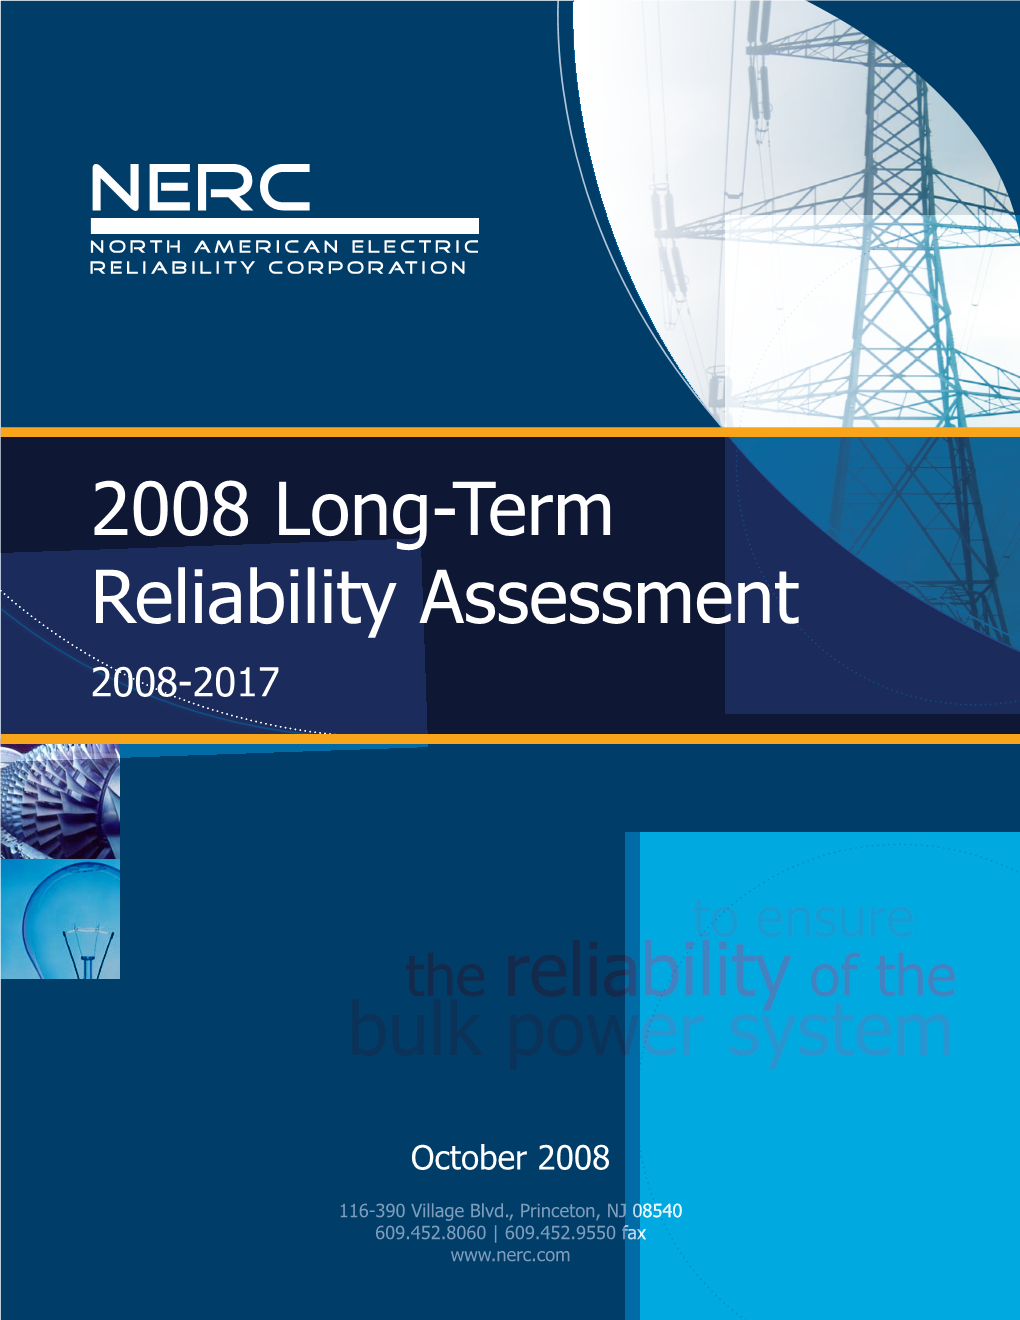 2008 Long-Term Reliability Assessment the Reliability of The